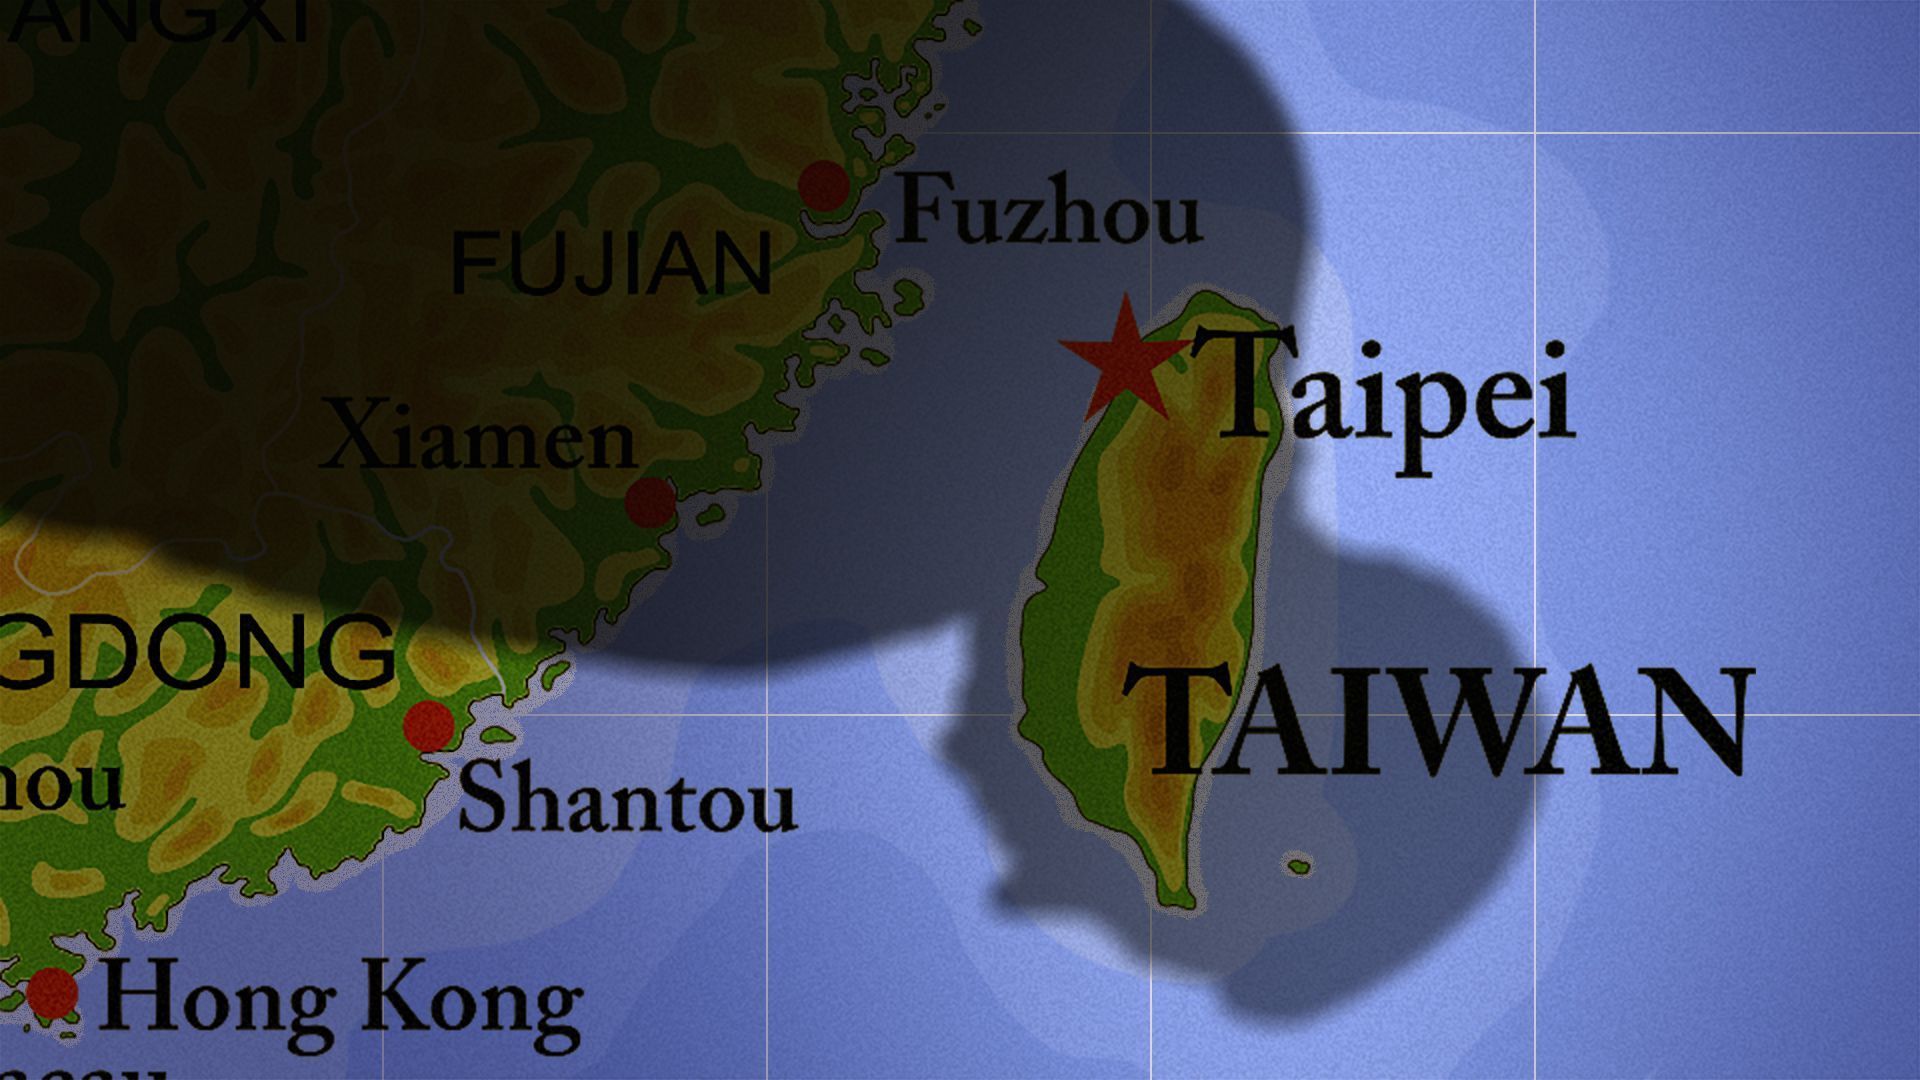 llustration of a map of the coast of China and Taiwan, with a giant shadow of Xi Jinping looming over it